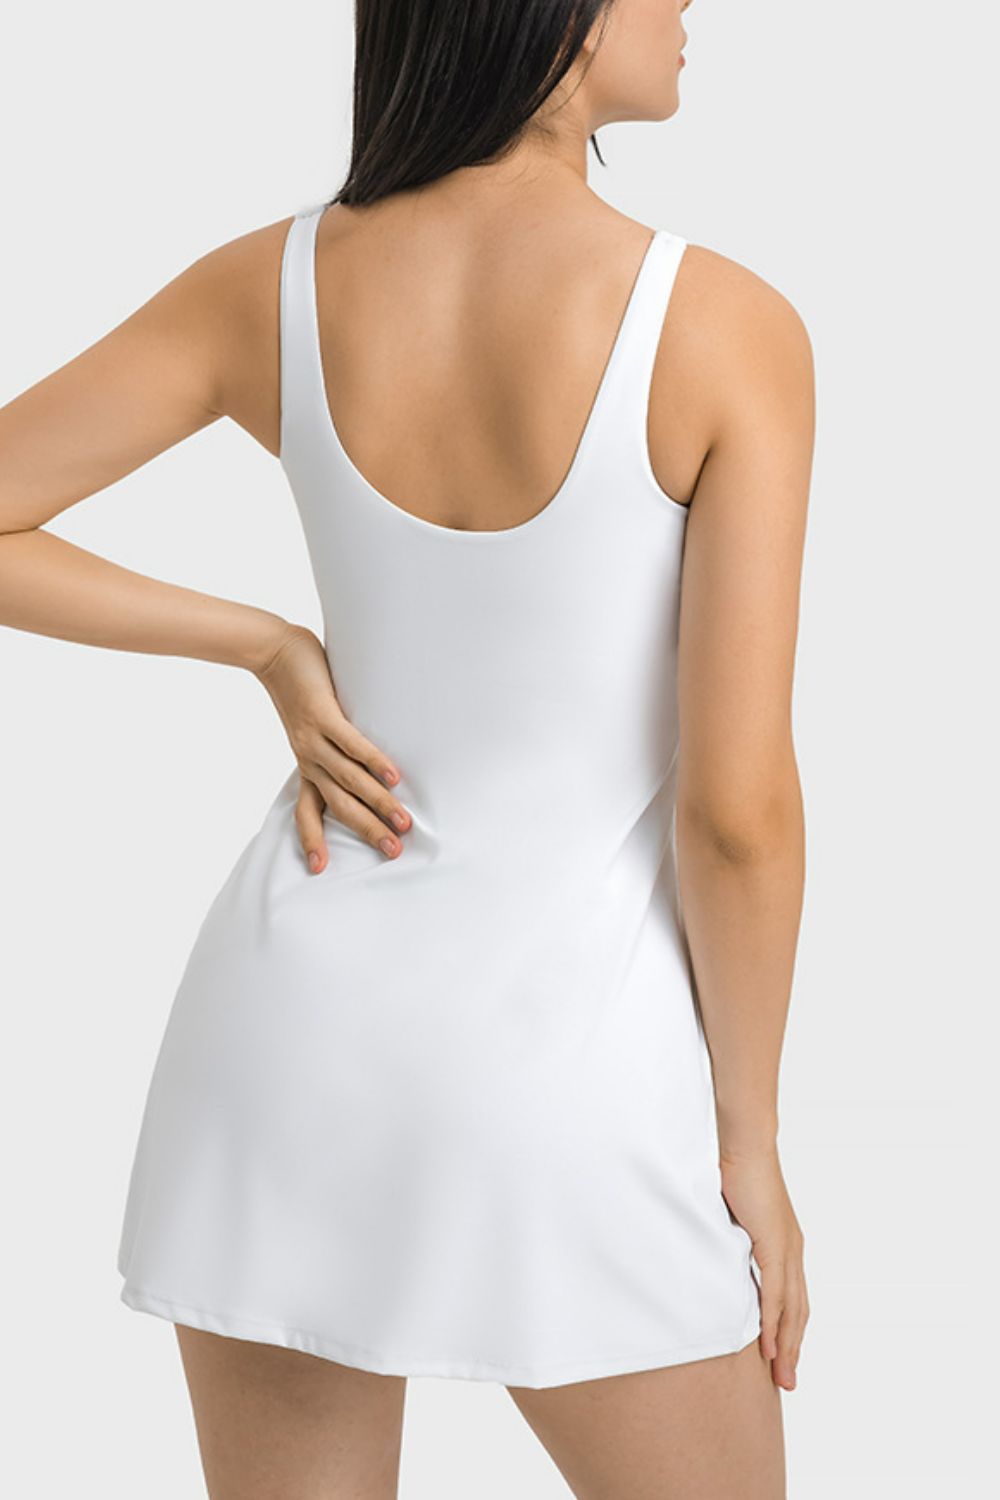 Back View, Square Neck Sports Tank Dress with Full Coverage Bottoms In White